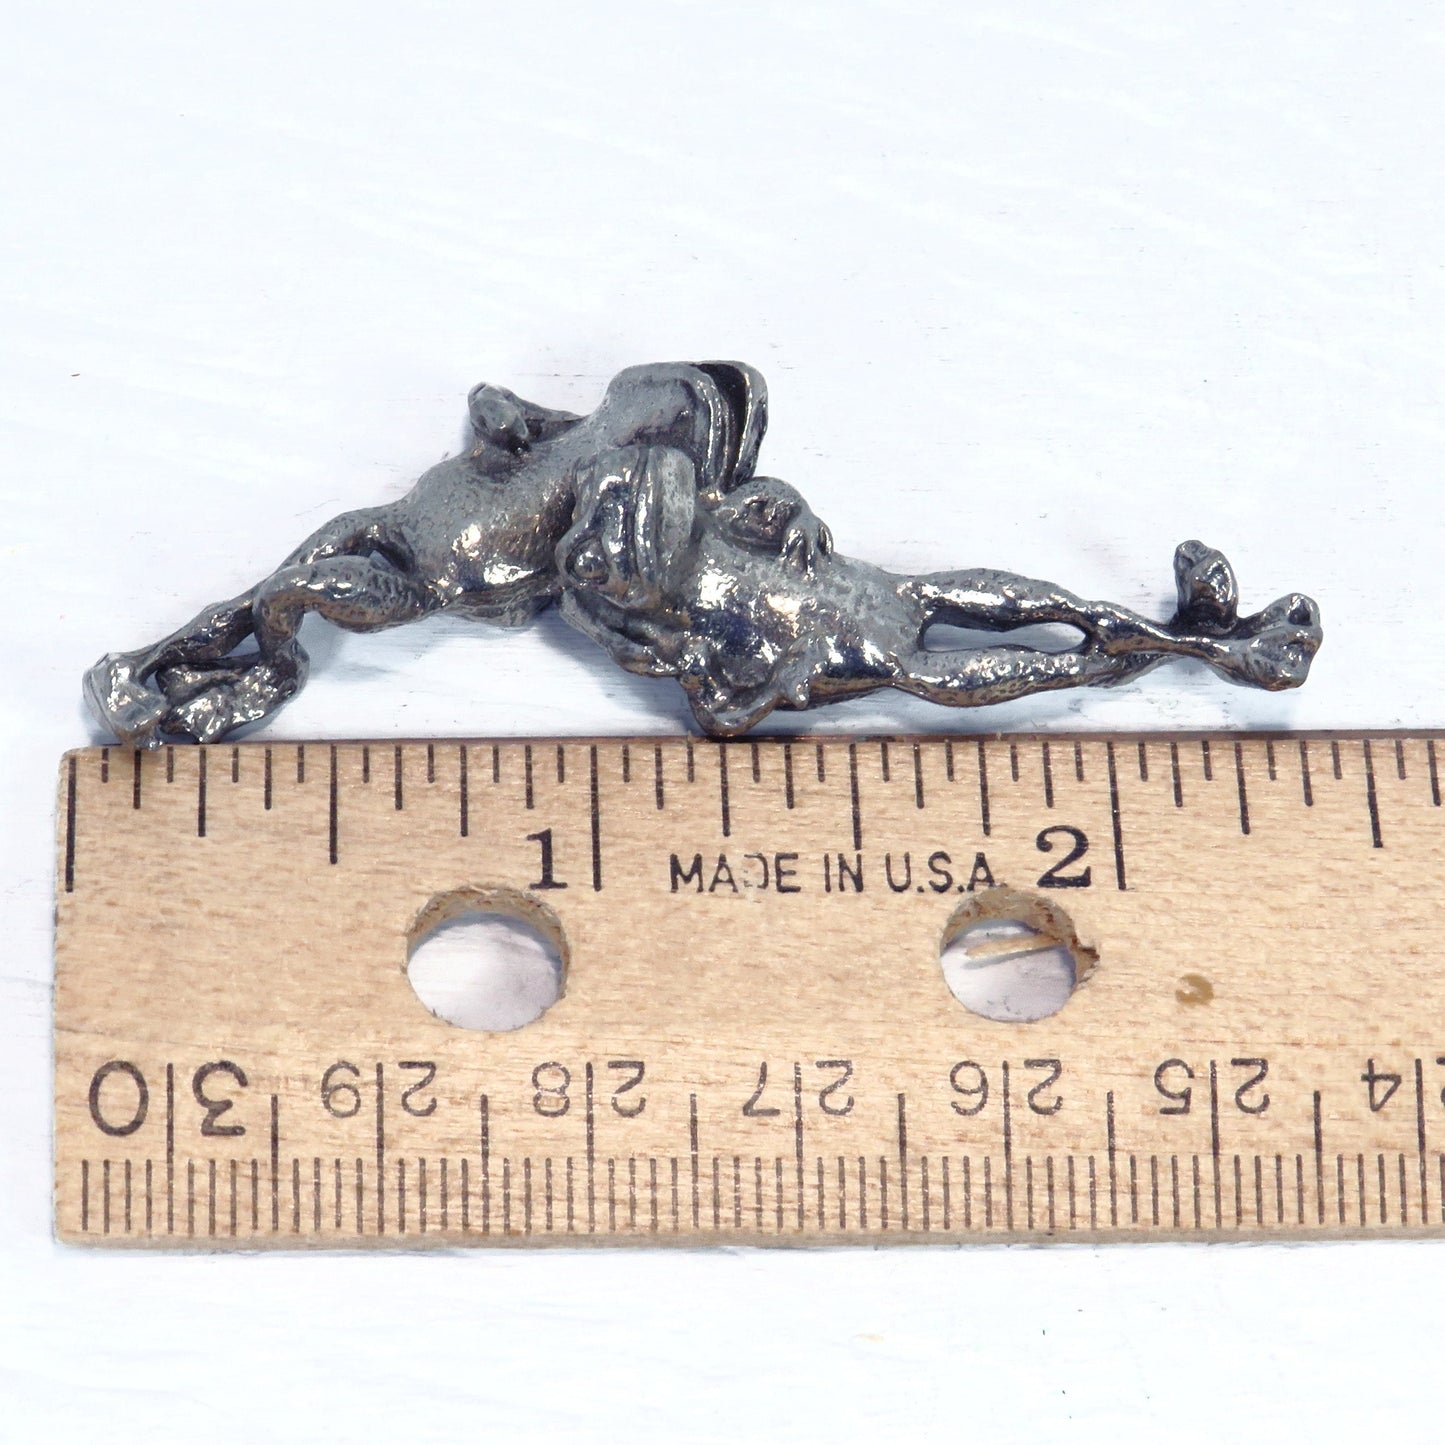 Vintage Pewter Figurine with 2 Frogs Lying Down / Frog Decor / Frog Lover Gift / Pewter Frog Statue